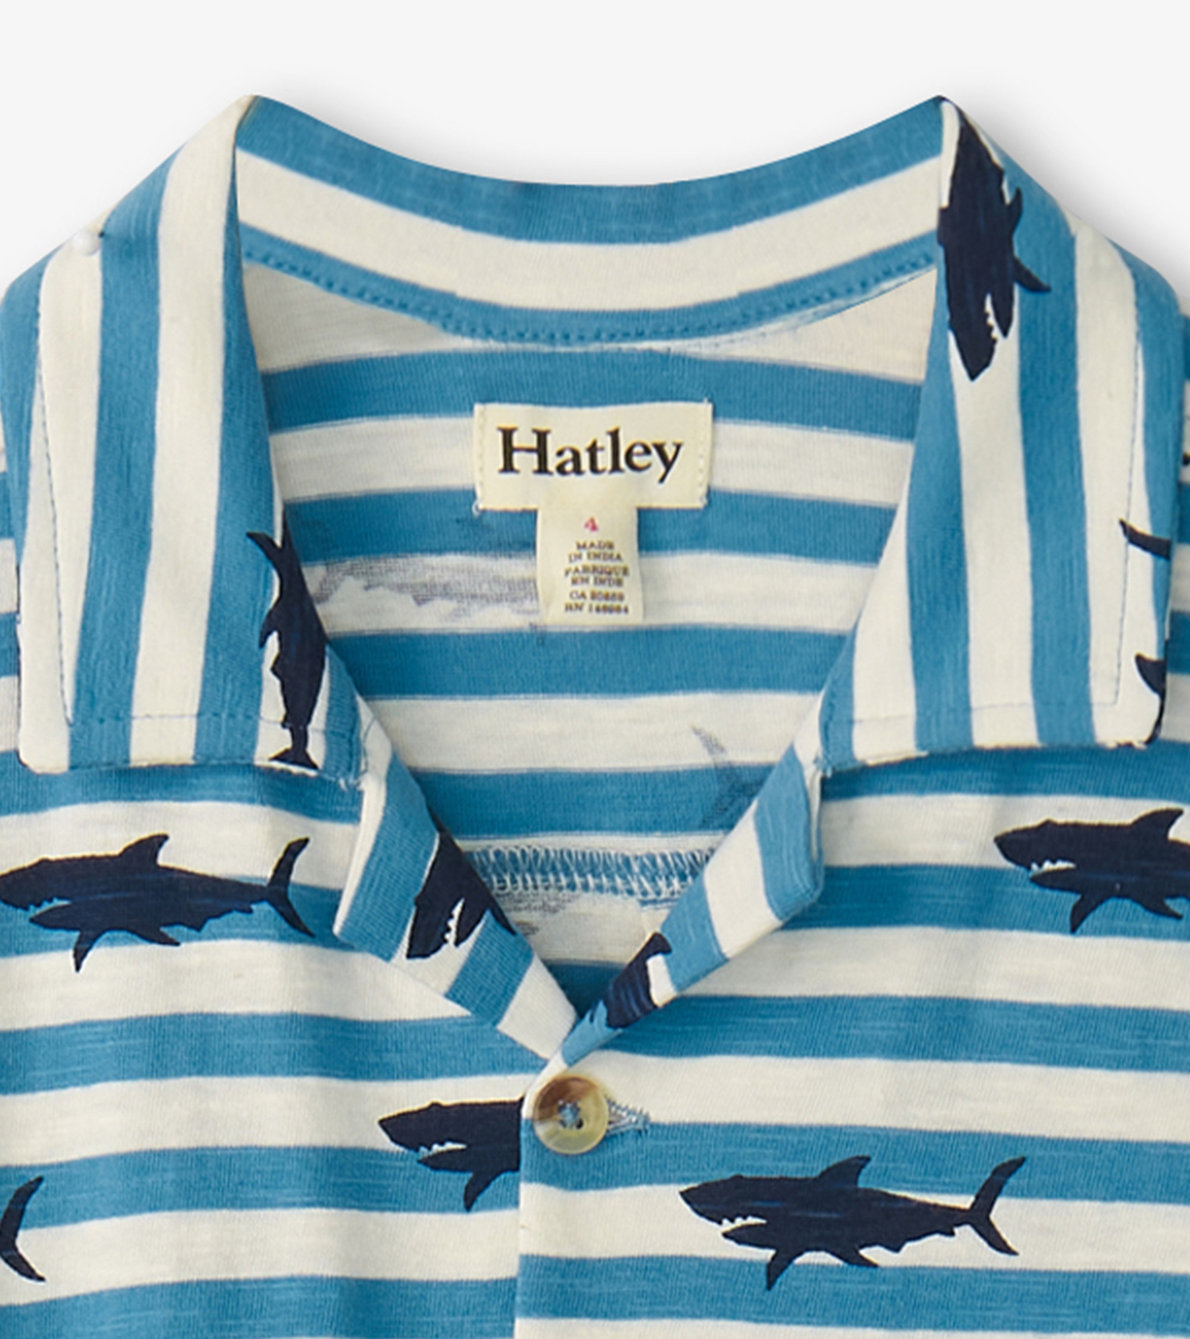 View larger image of Boys Shark Stripes Jersey Button Down